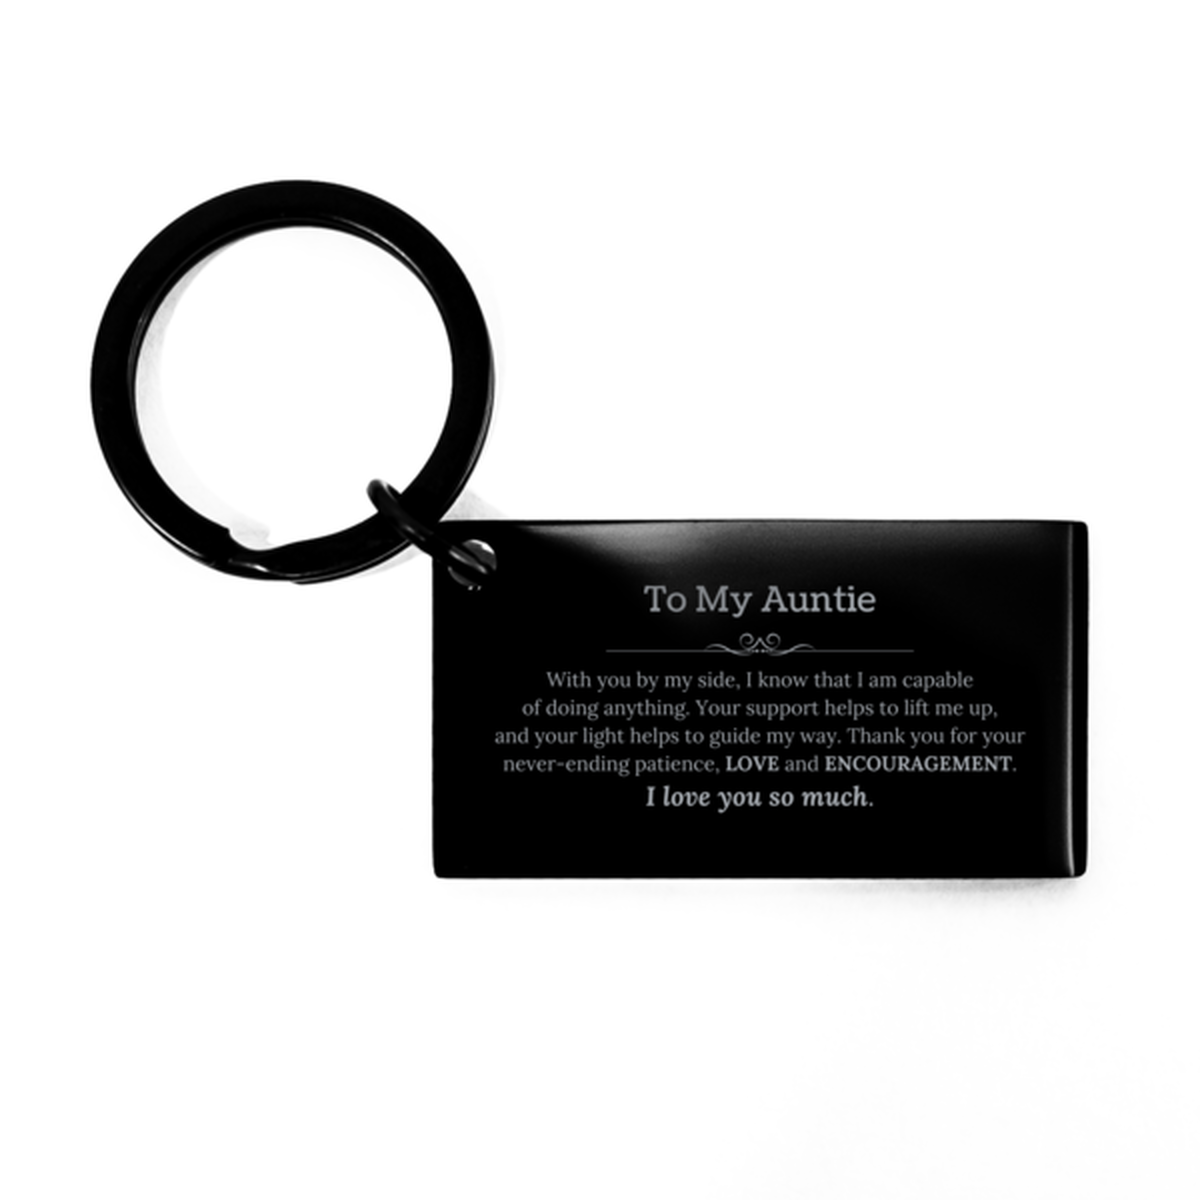 Appreciation Auntie Keychain Gifts, To My Auntie Birthday Christmas Wedding Keepsake Gifts for Auntie With you by my side, I know that I am capable of doing anything. I love you so much